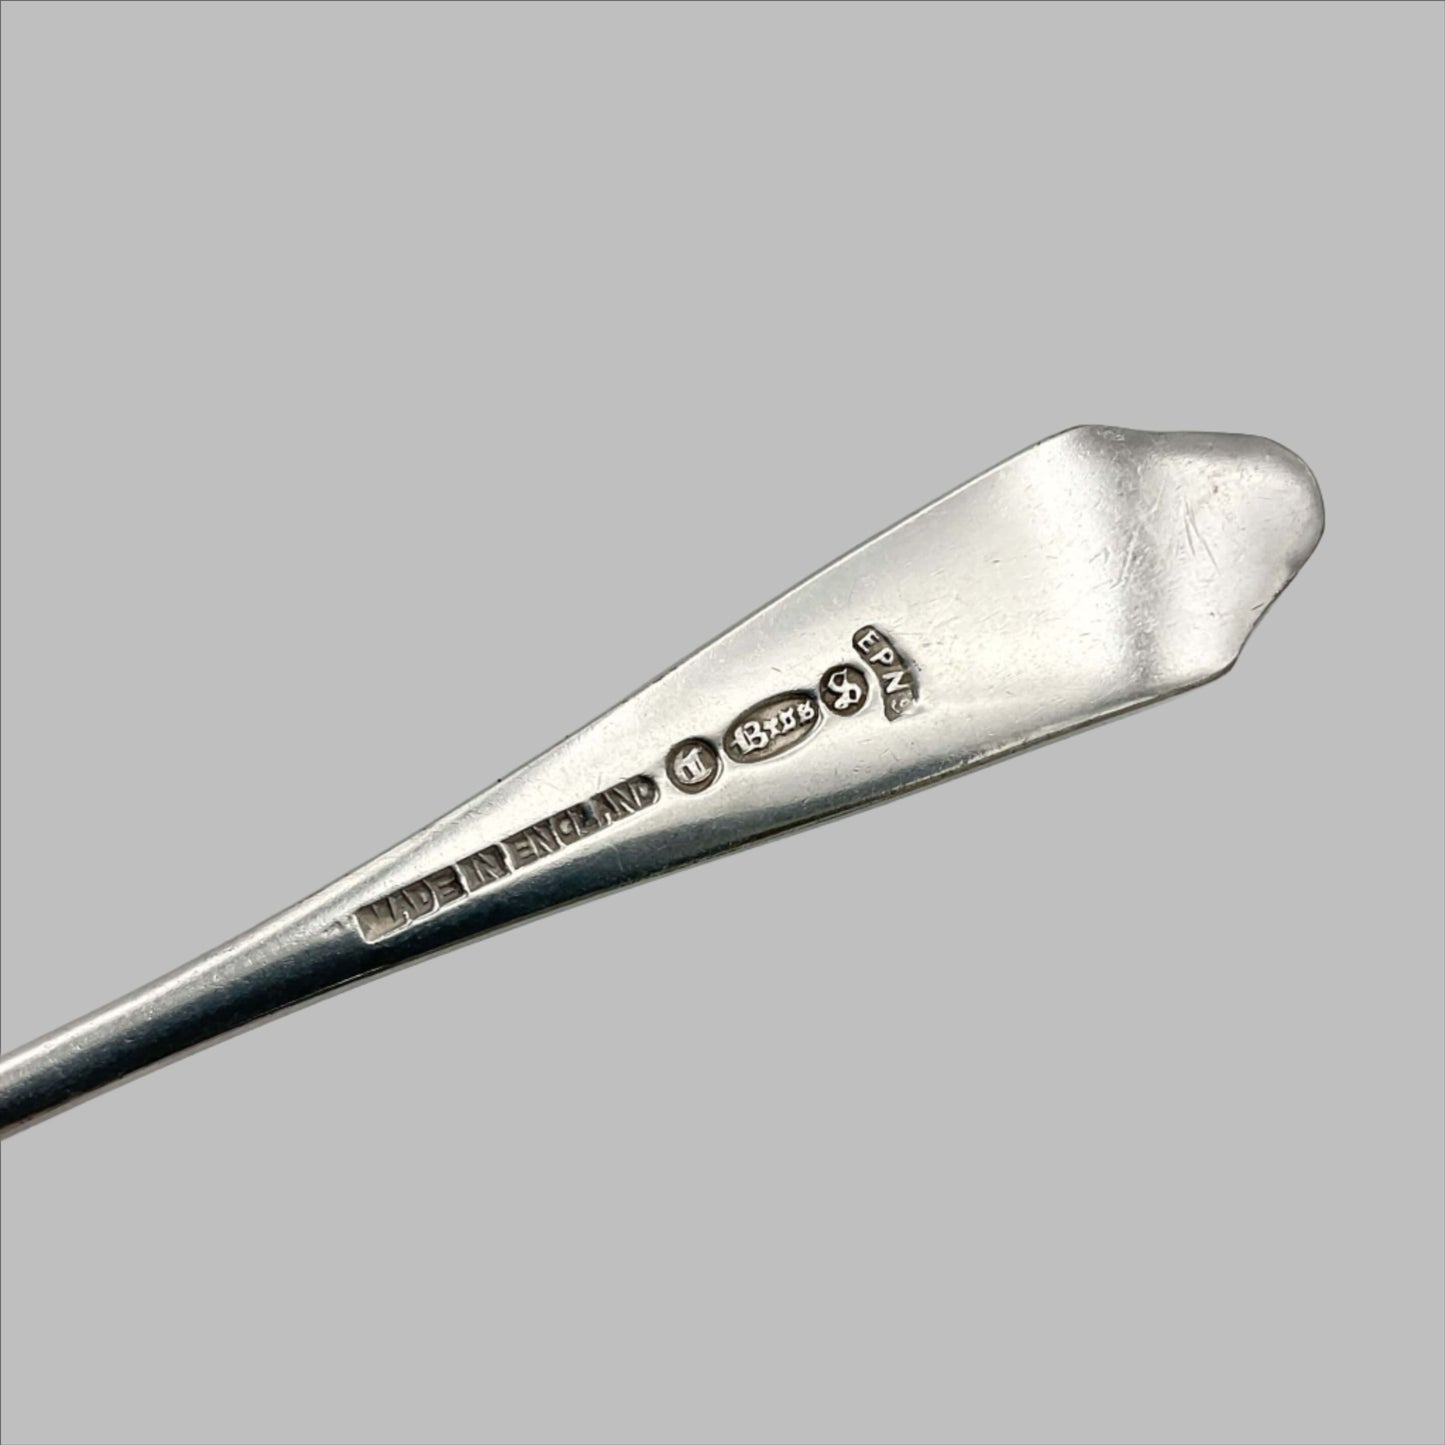 Back of spoon showing the makers marks and made in England